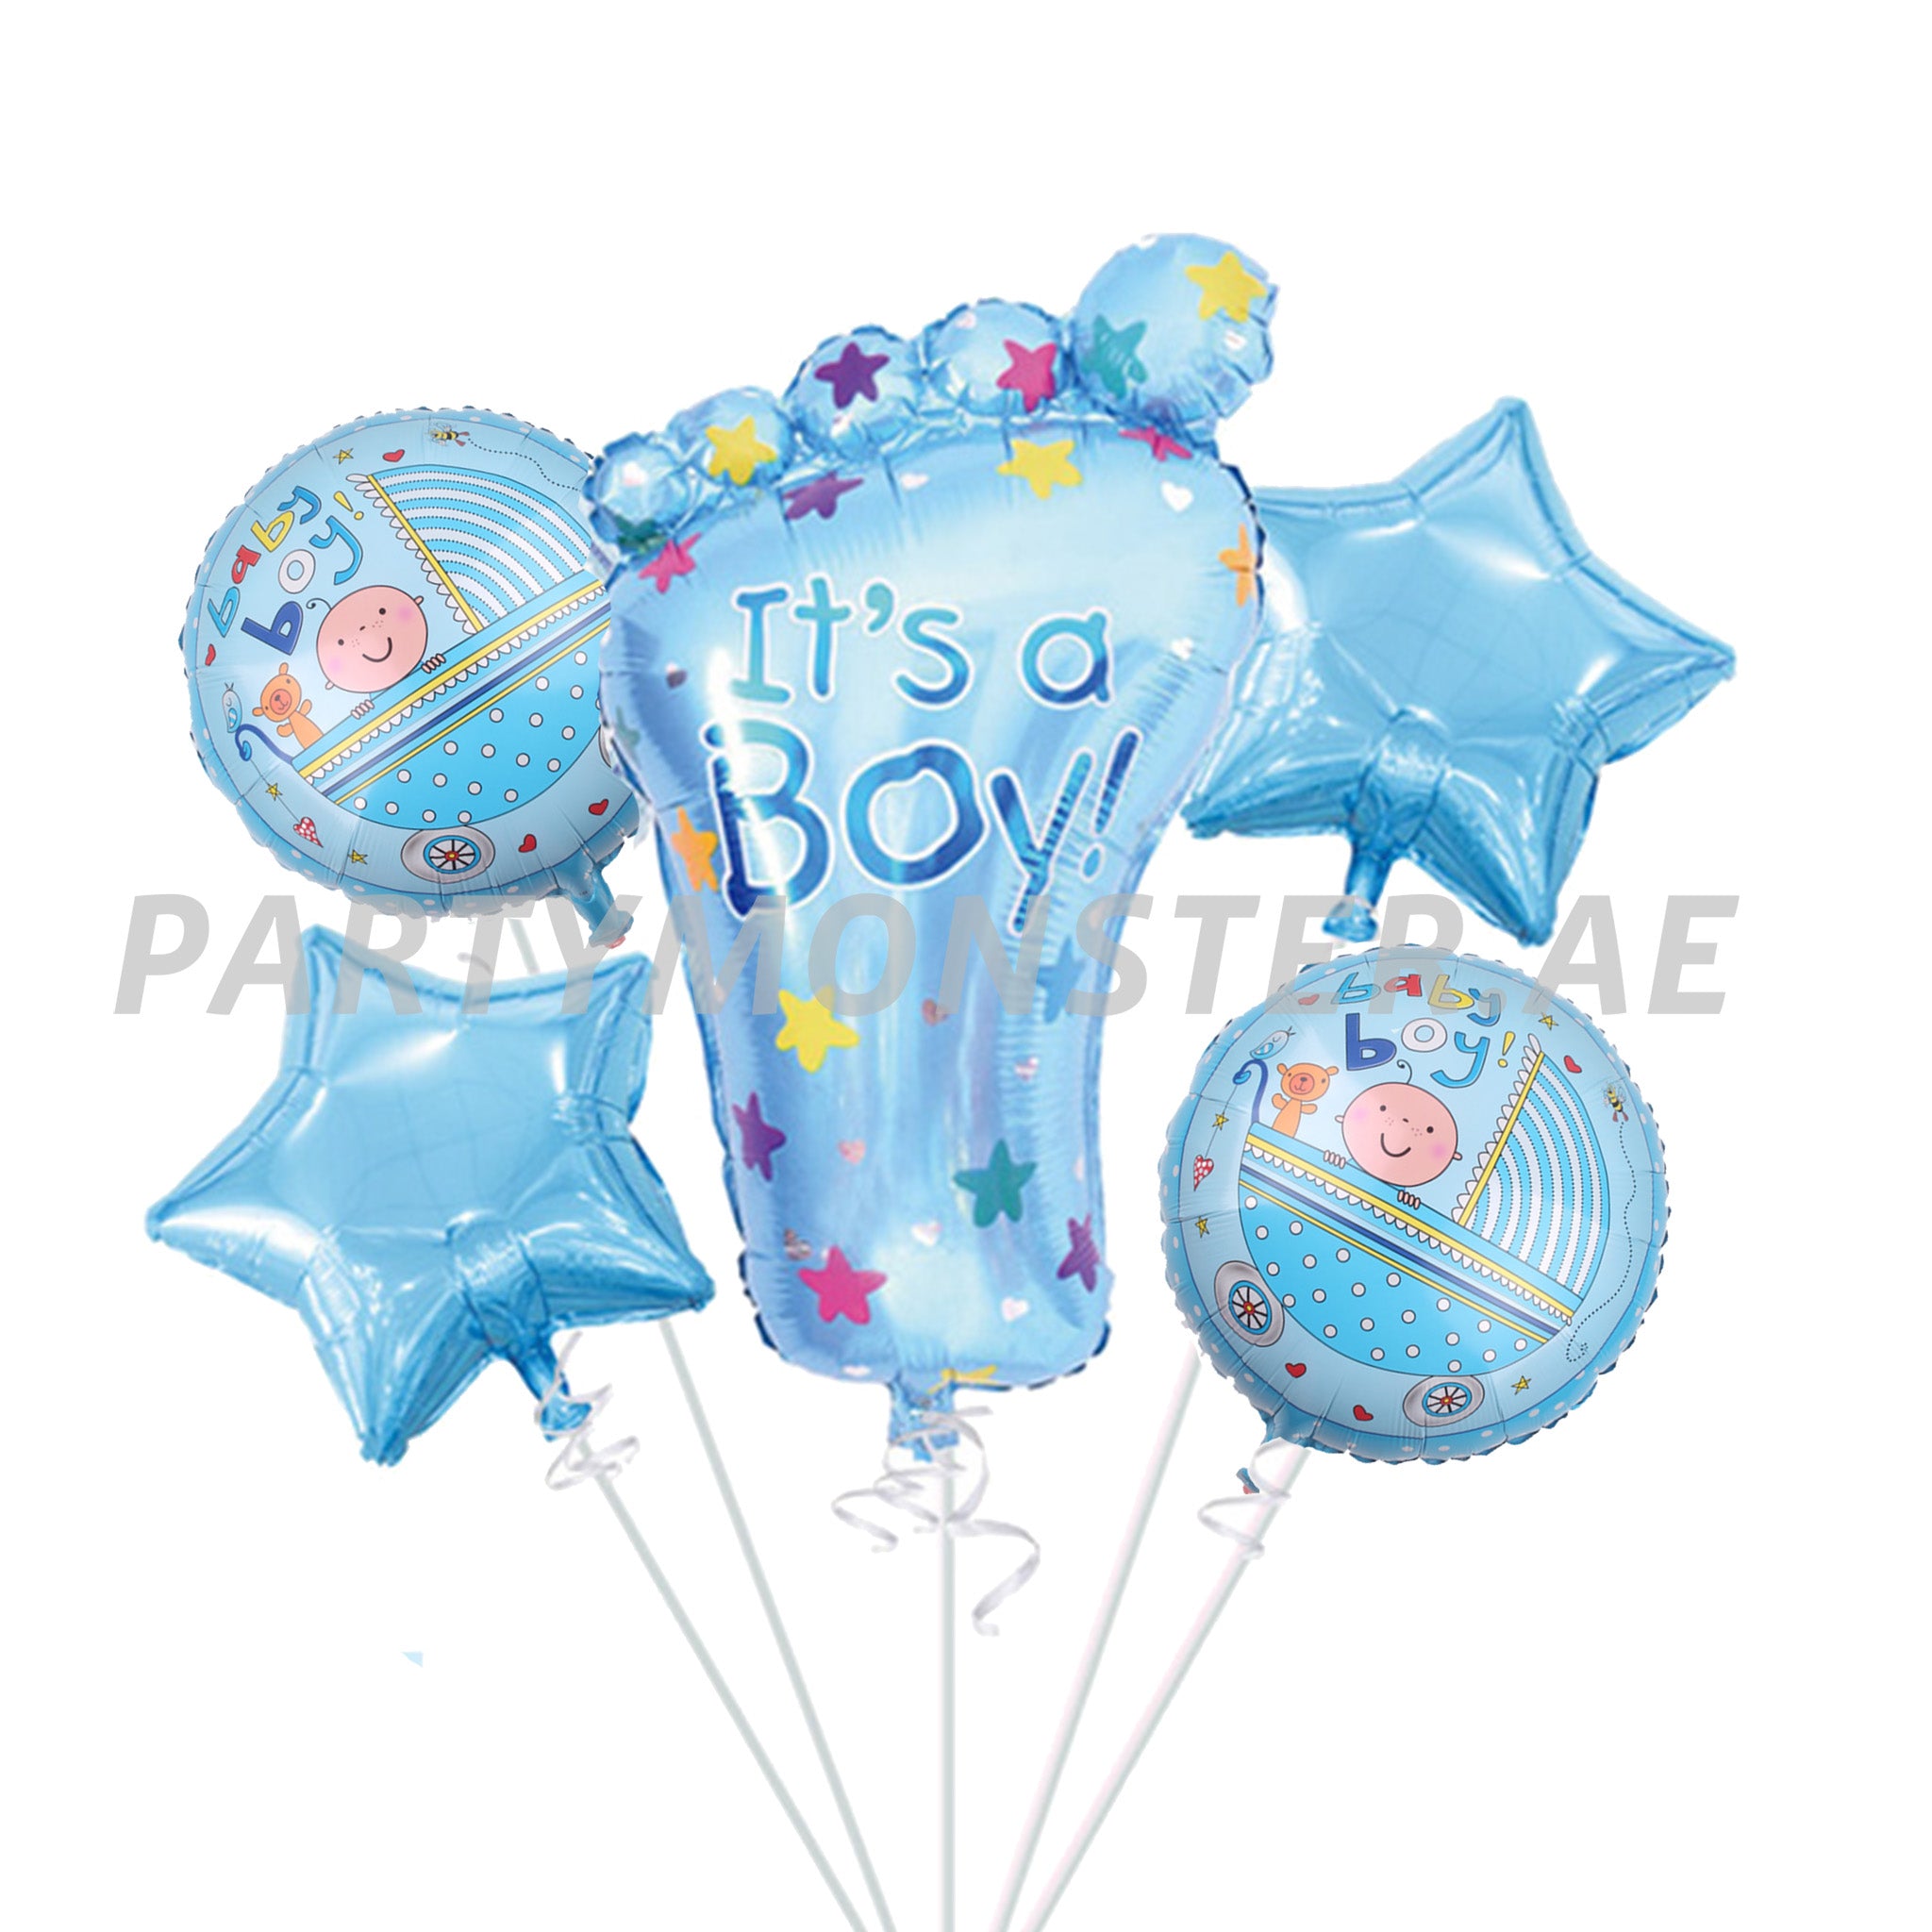 It's a boy baby foot foil balloons bouquet - PartyMonster.ae